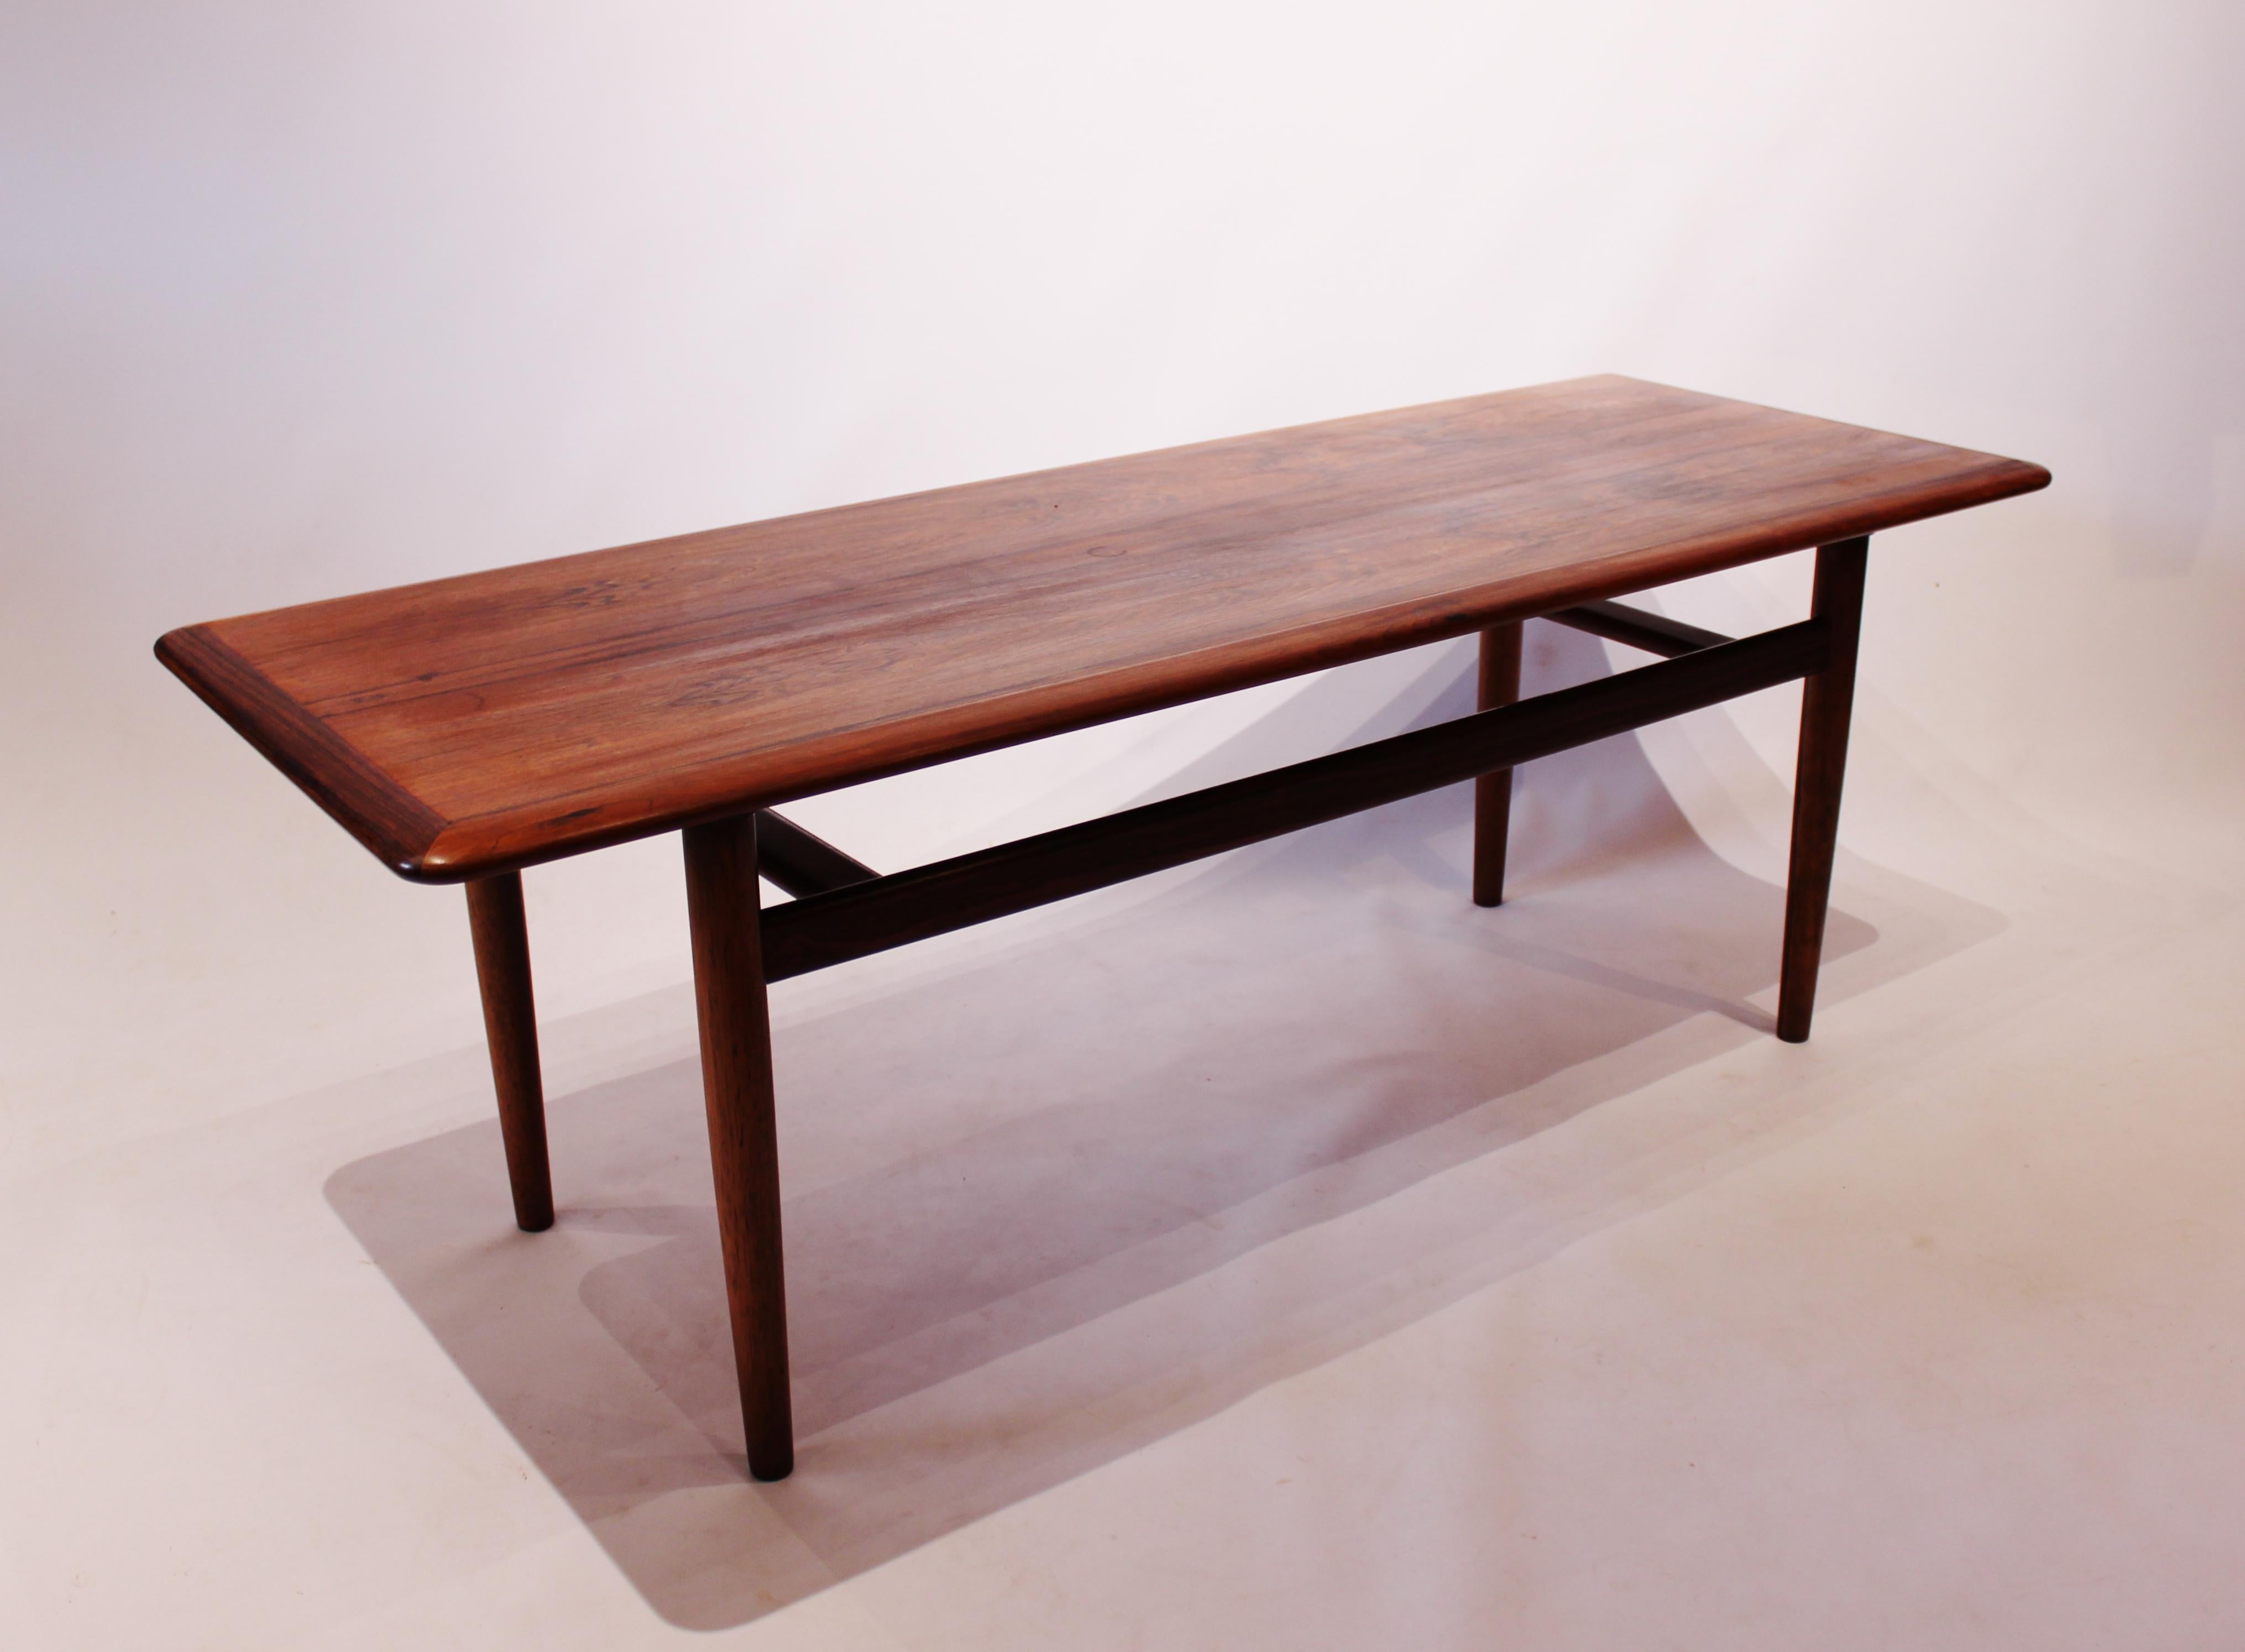 This coffee table is a beautiful representation of Danish design from the 1960s, made in rich rosewood. Rosewood, also known as rosewood, is sought after for its deep, luscious grain and warm tones that add a luxurious feel to any